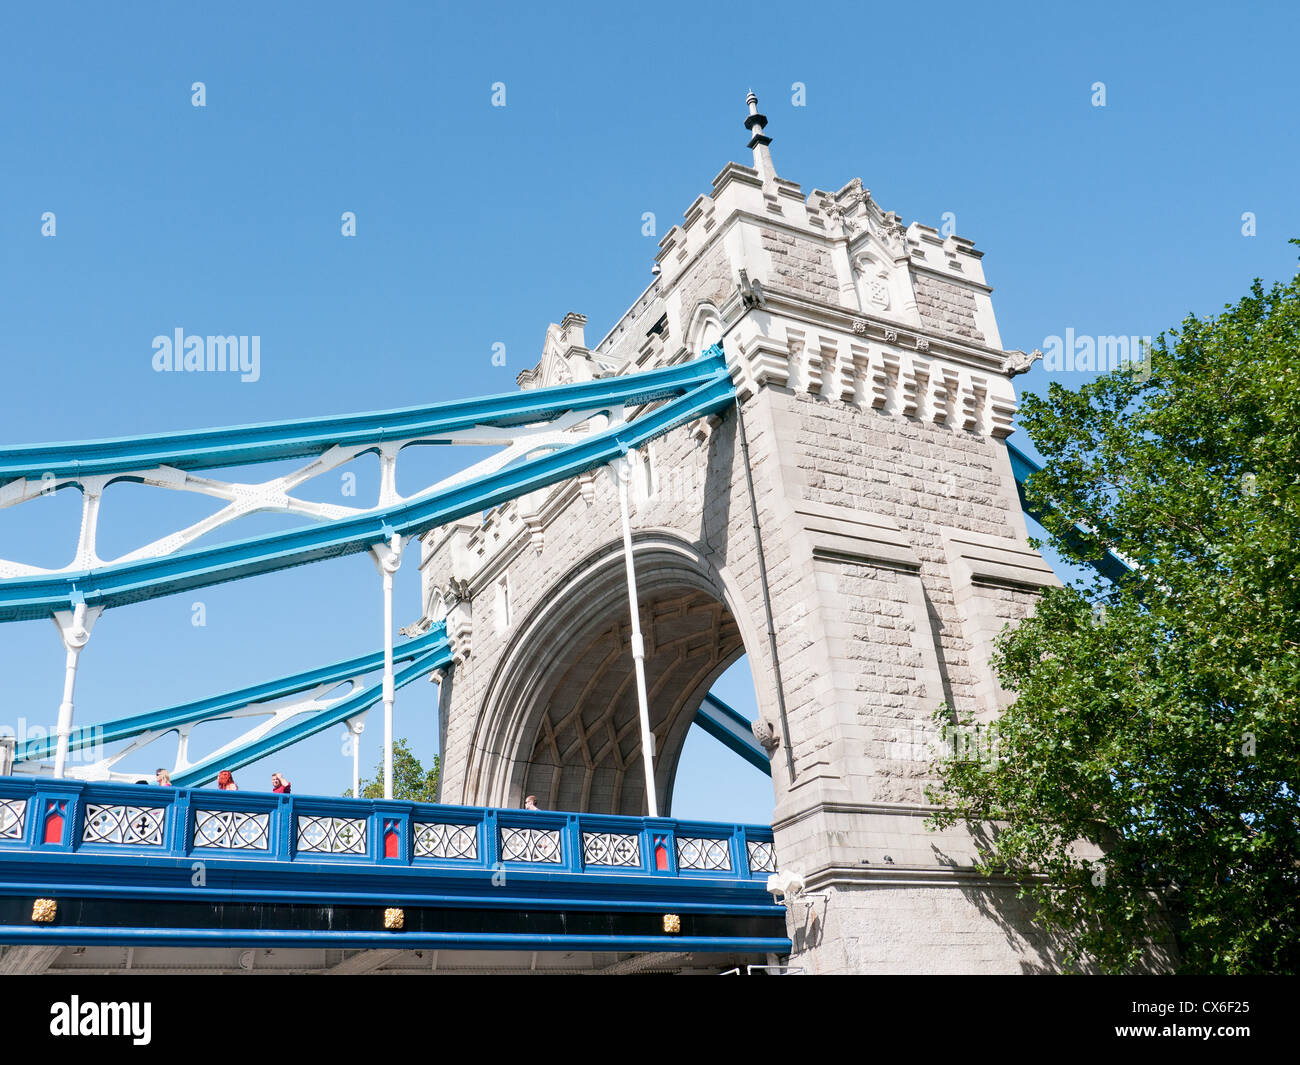 The North Tower of Tower Bridge view from St Katherine Docks, London, UK Stock Photo